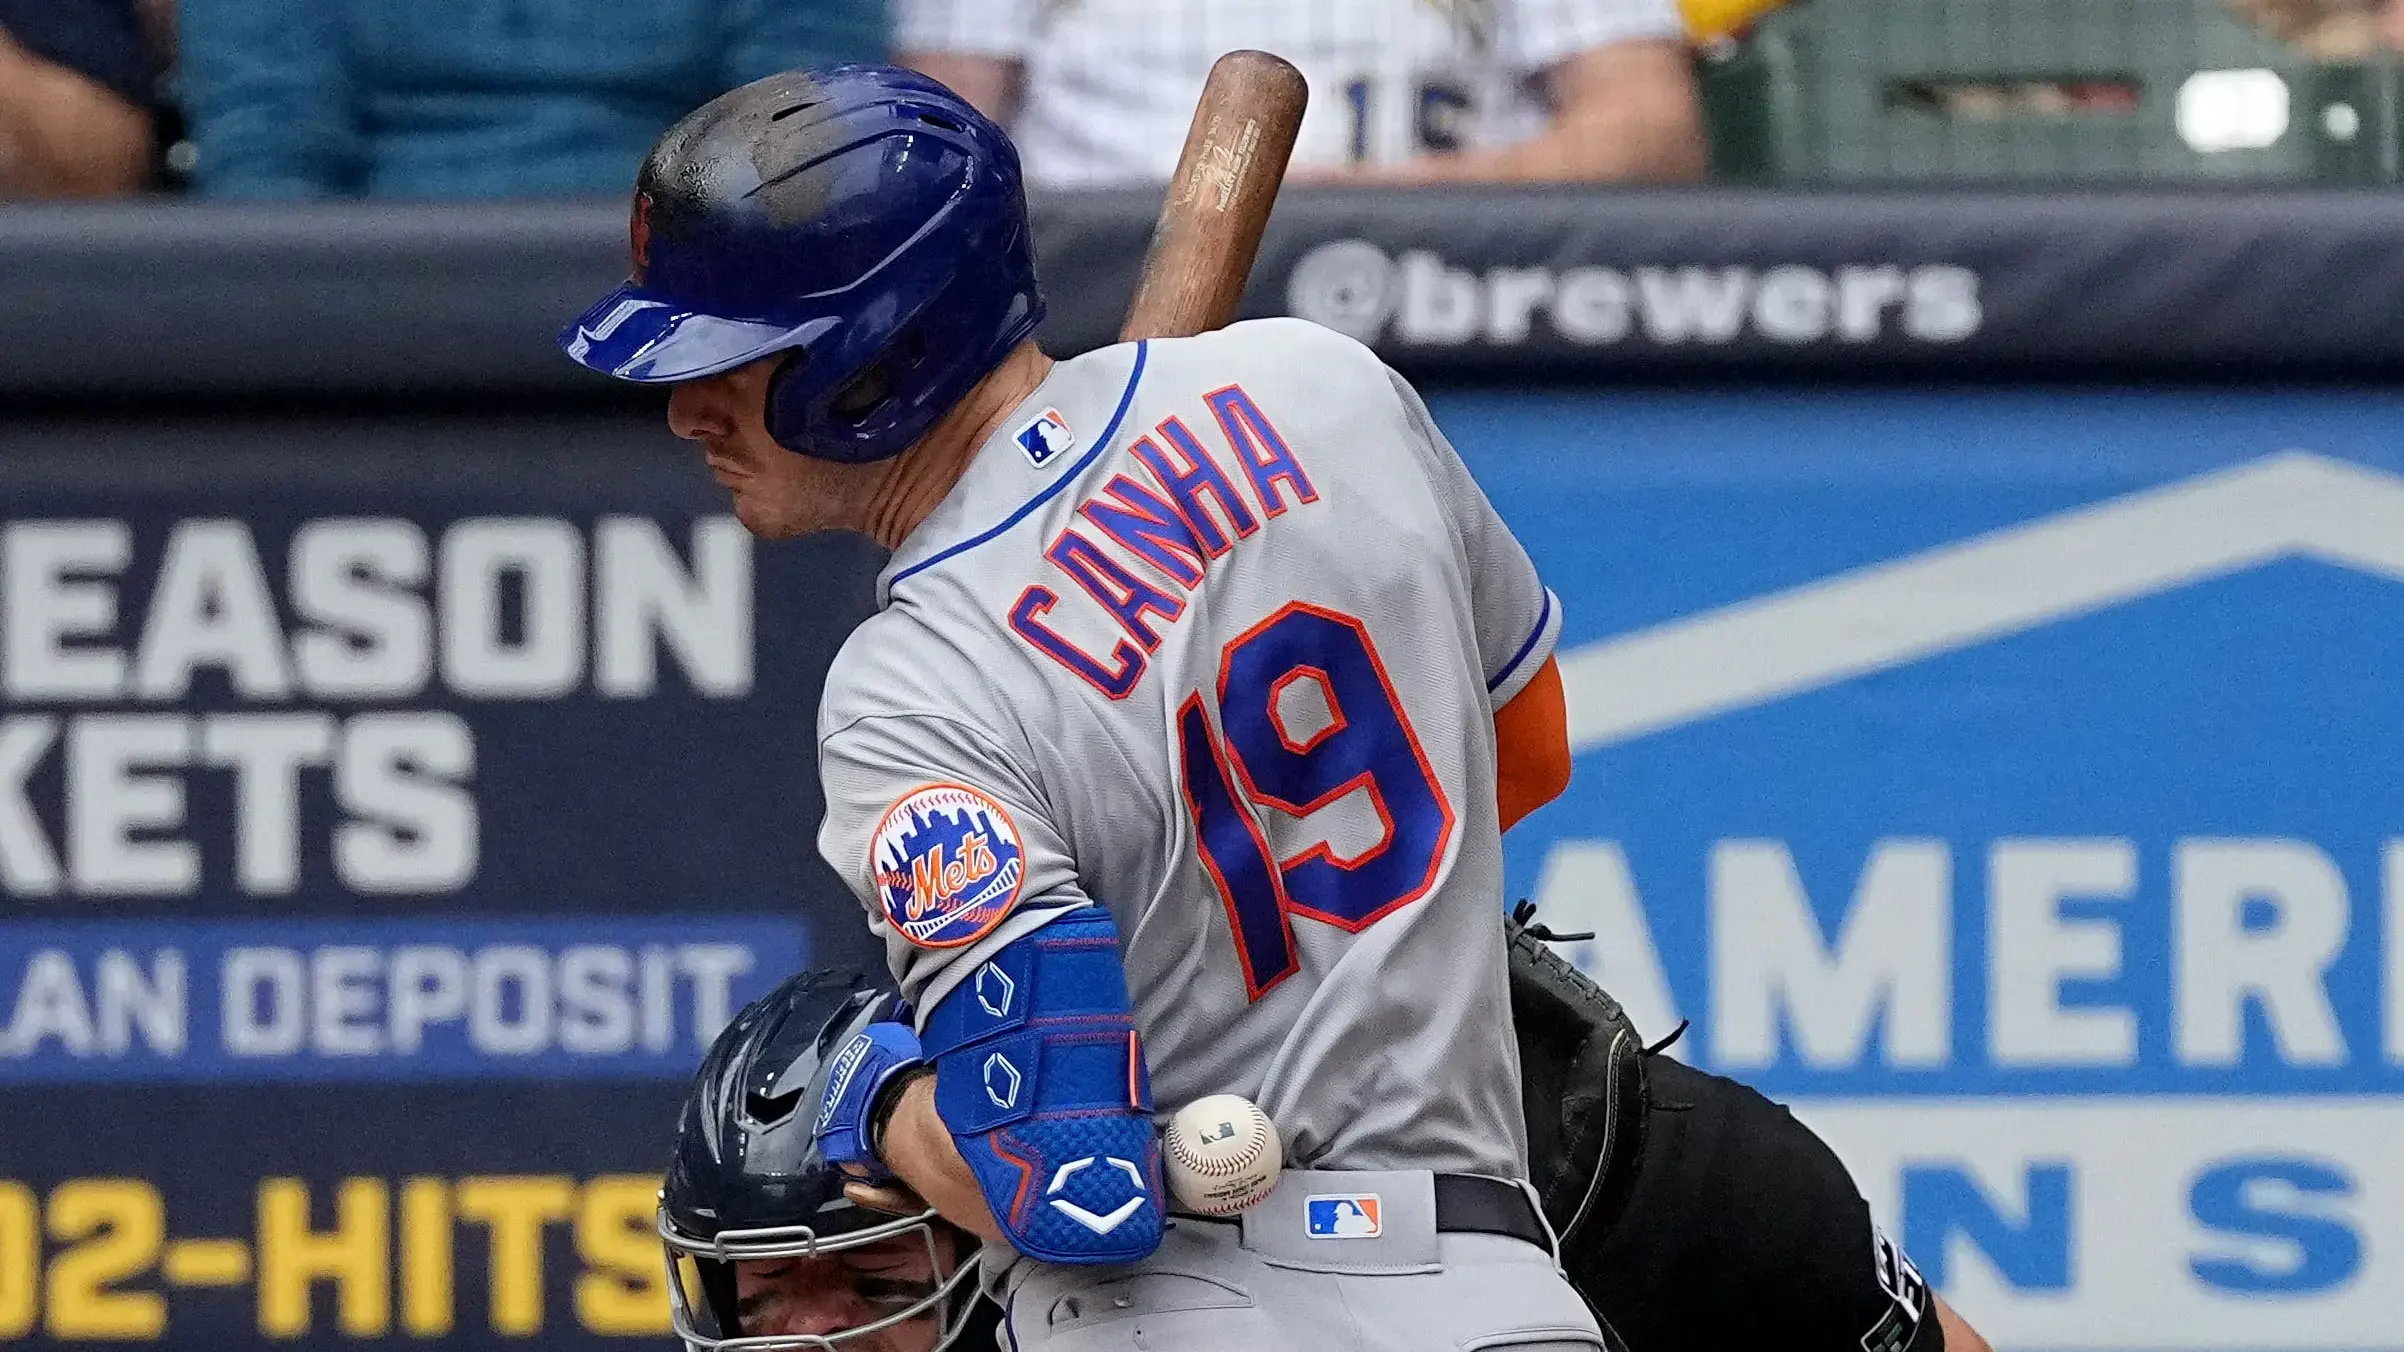 New York Mets left fielder Mark Canha (19) is hit by a pitch thrown by Milwaukee Brewers starting pitcher Adrian Houser during the fifth inning of their game Wednesday, September 21, 2022 at American Family Field in Milwaukee, Wis / MARK HOFFMAN/MILWAUKEE JOURNAL SENTINEL / USA TODAY NETWORK